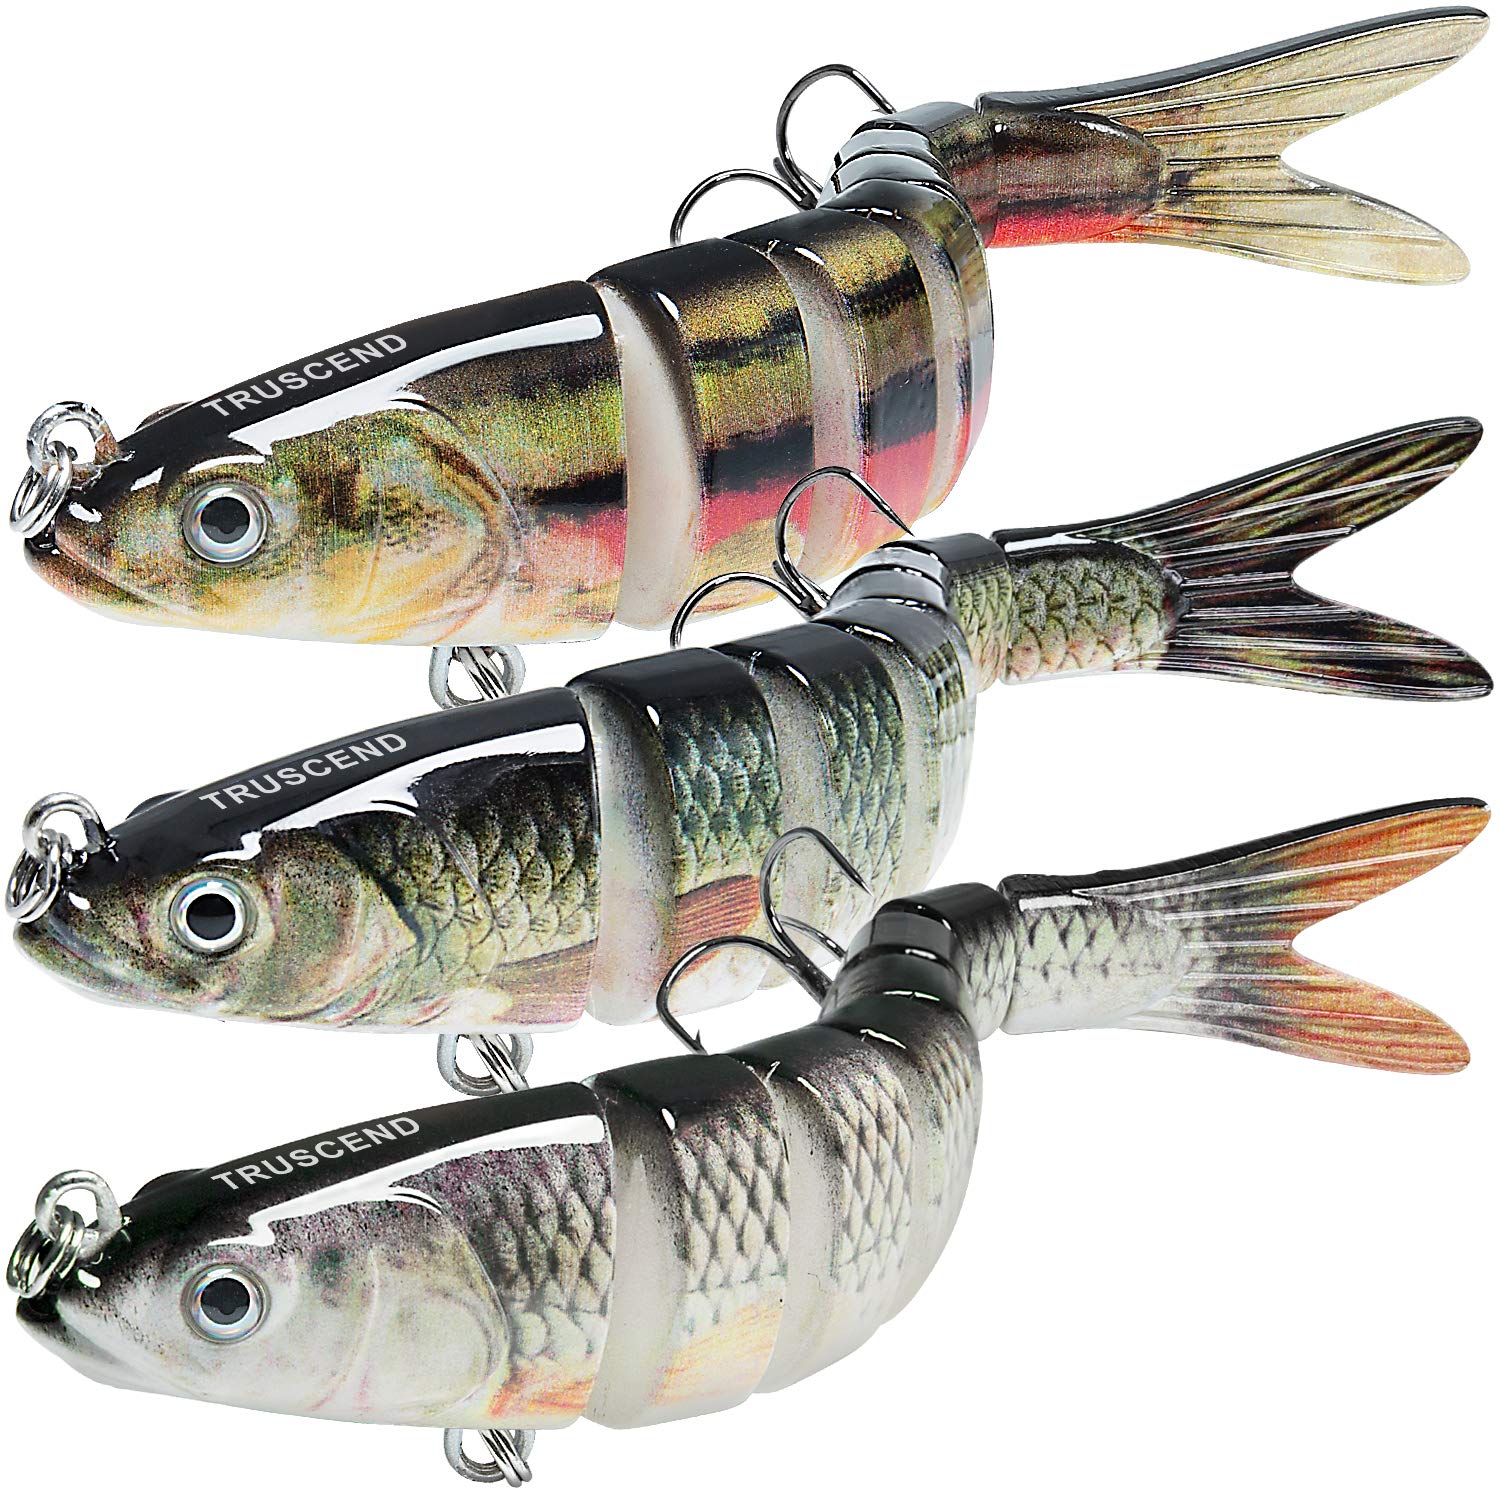 TRUSCEND Fishing Lures for Bass Trout Multi Jointed Swimbaits Slow Sinking  Bionic Swimming Lures Bass Freshwater